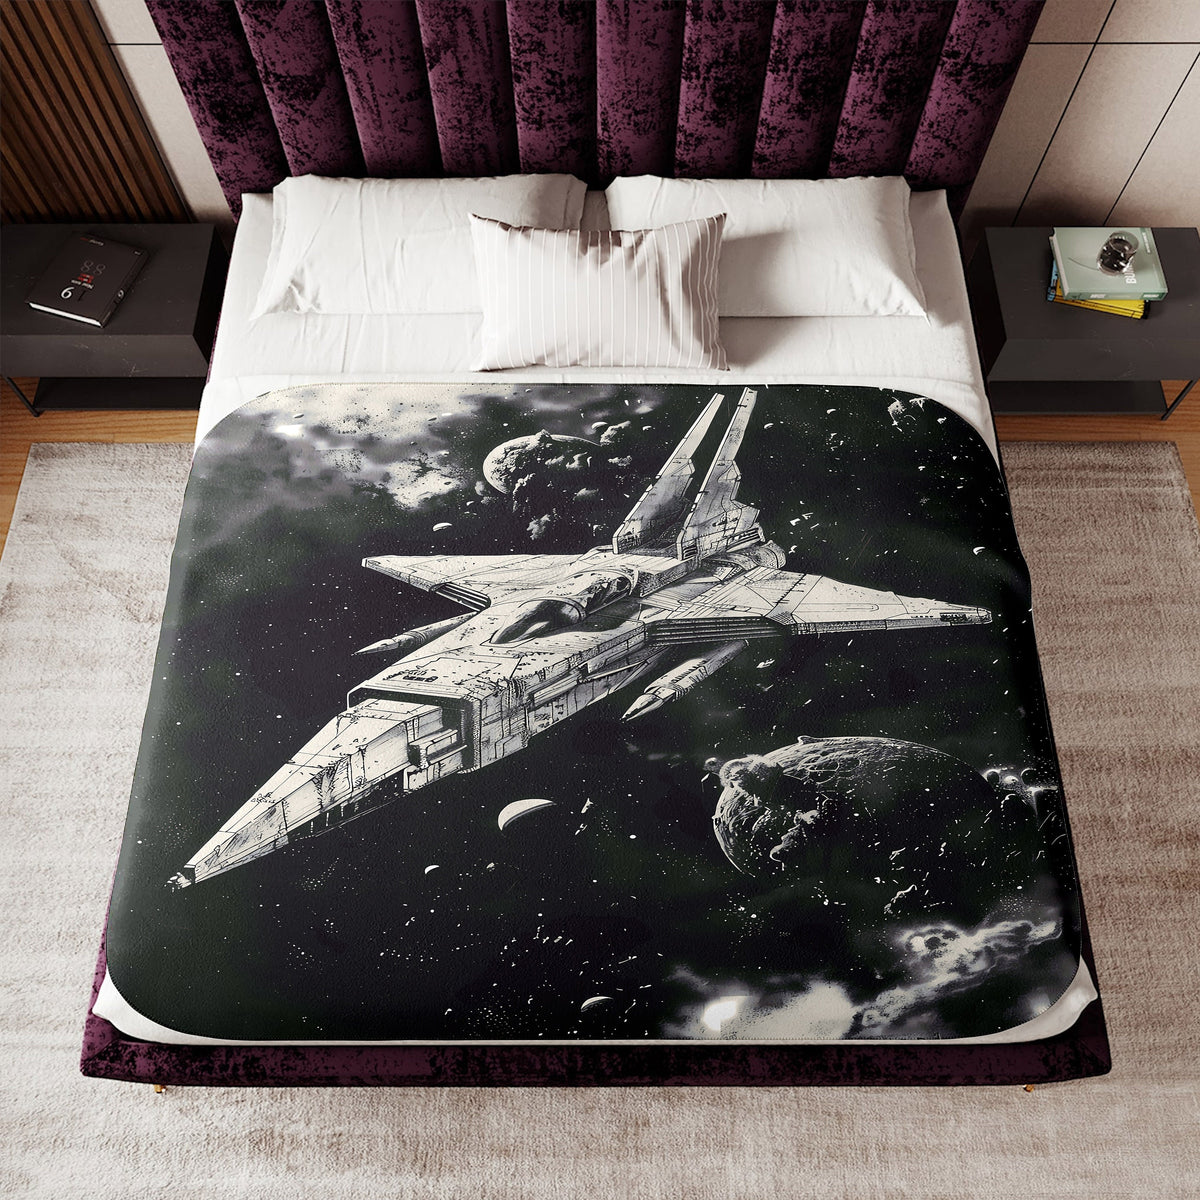 a bed that has a picture of a space ship on it